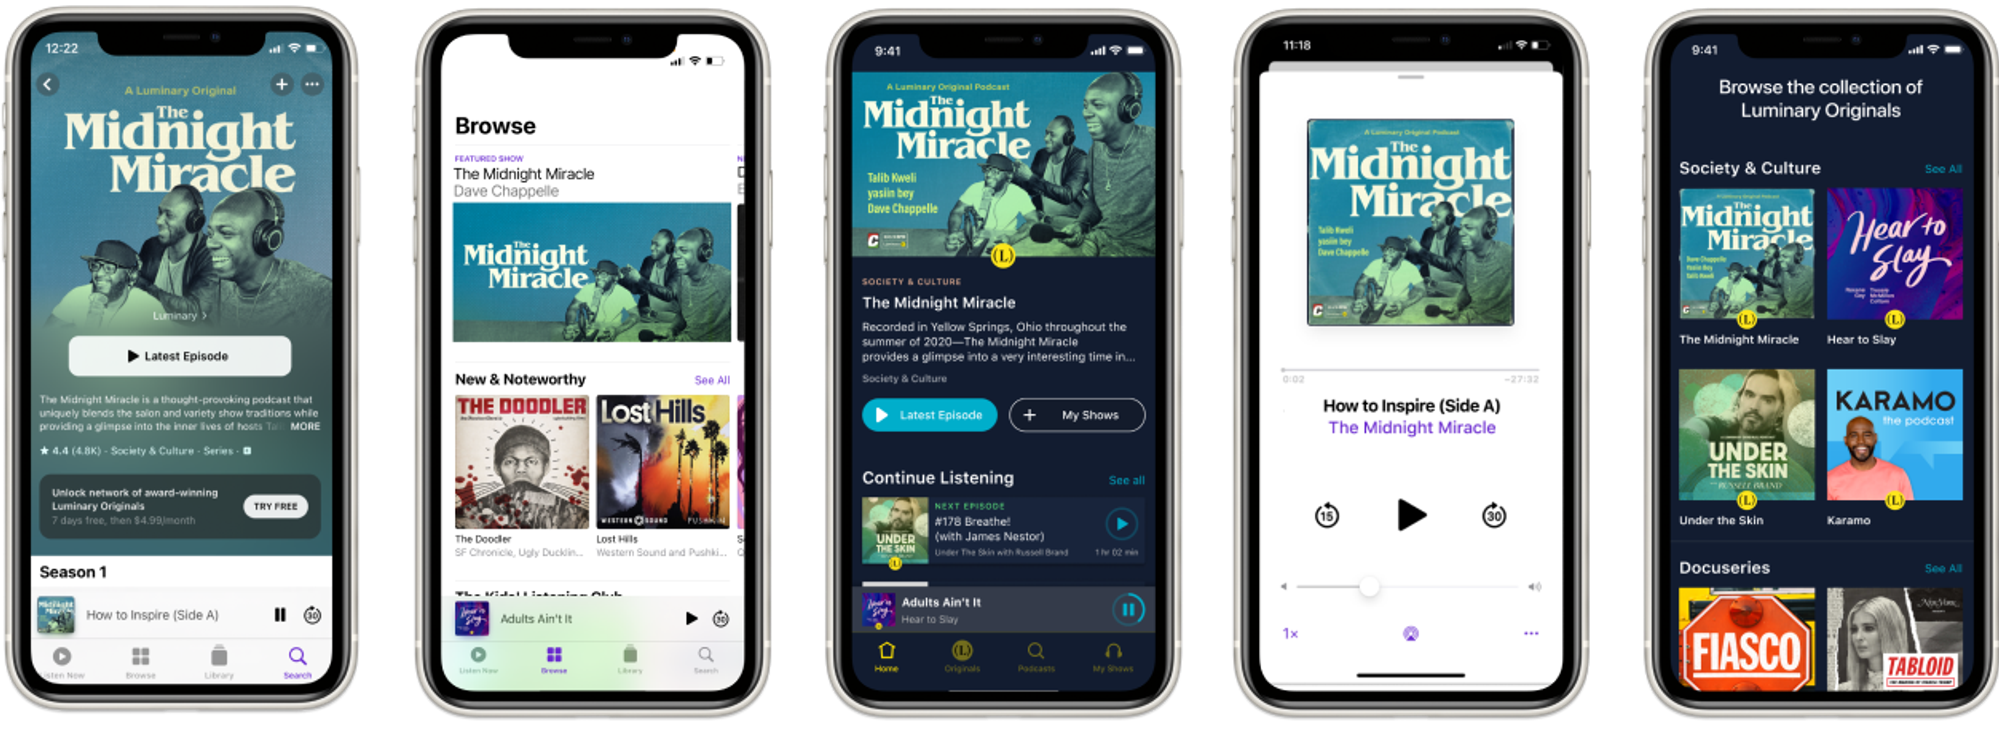 The Midnight Miracle is available on Luminary as well as Apple Podcasts.